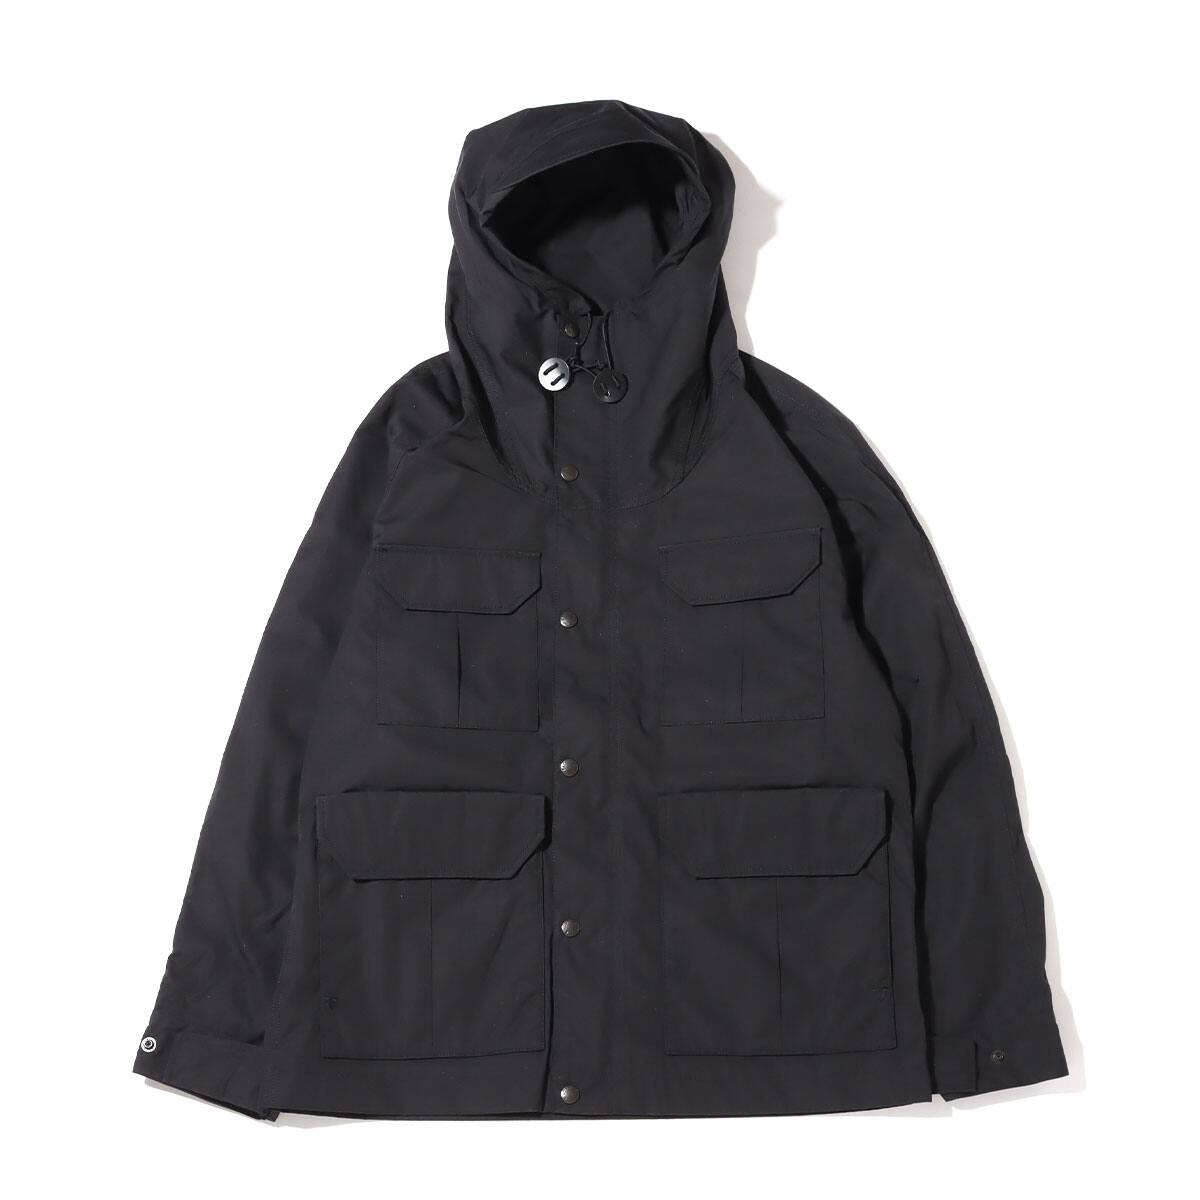 THE NORTH FACE PURPLE LABEL 65/35 MOUNTAIN PARKA BLACK 22SS-I